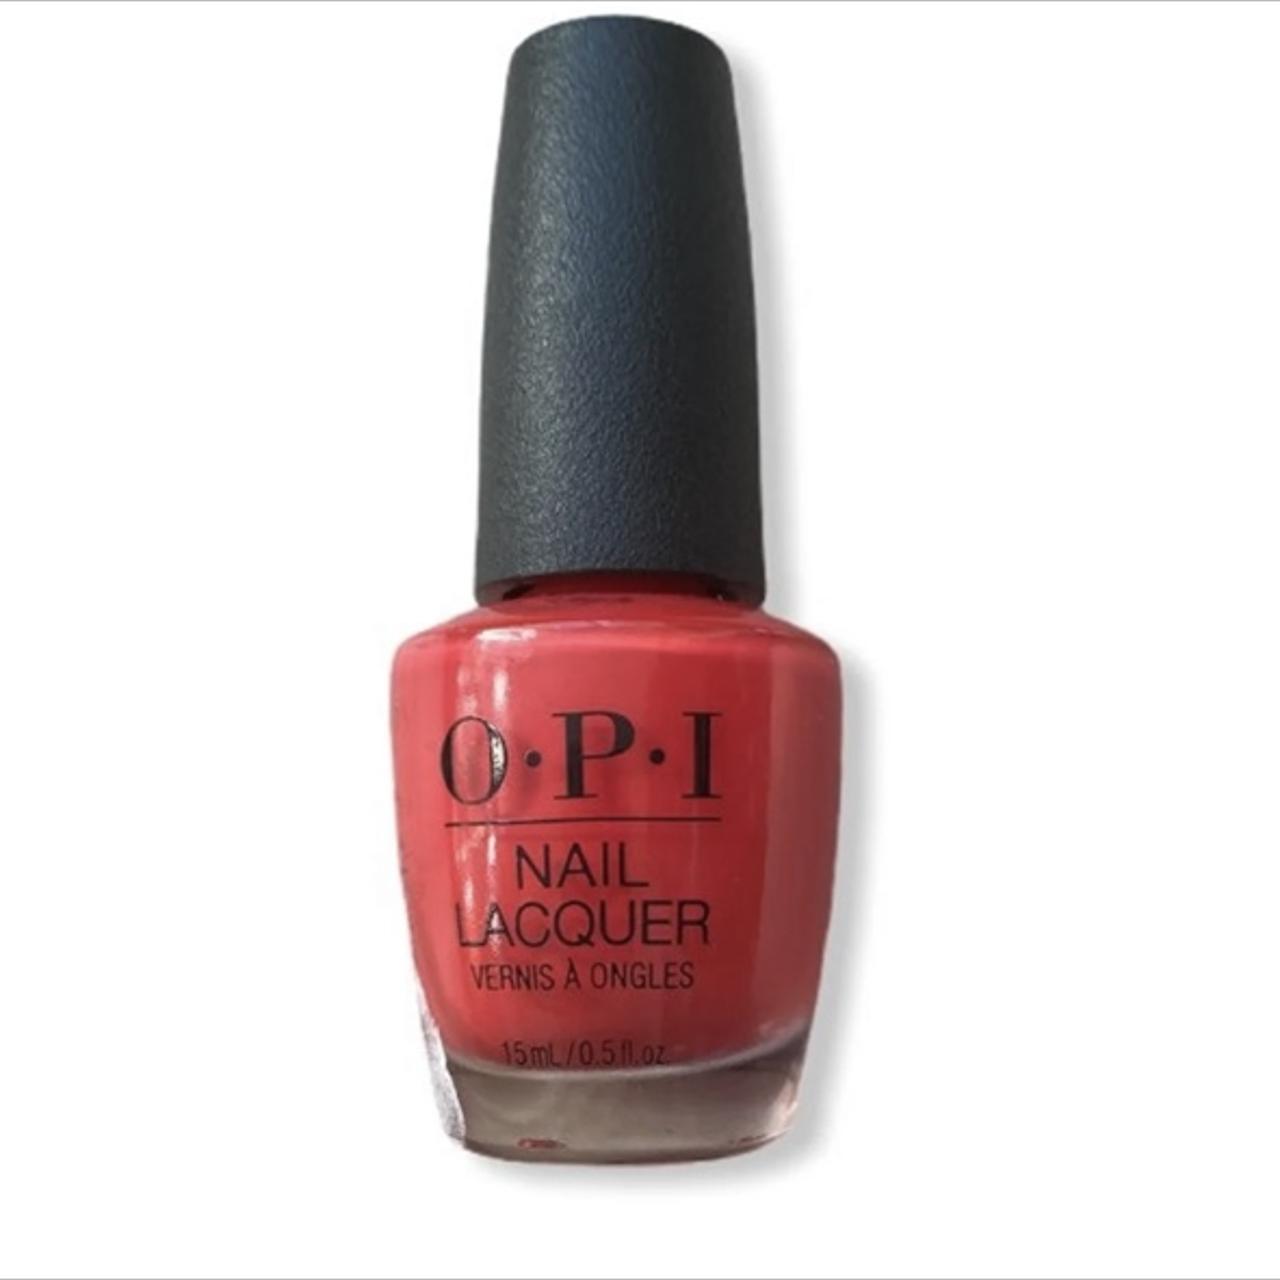 Product Image 2 - OPI "on Collins Ave" Nail